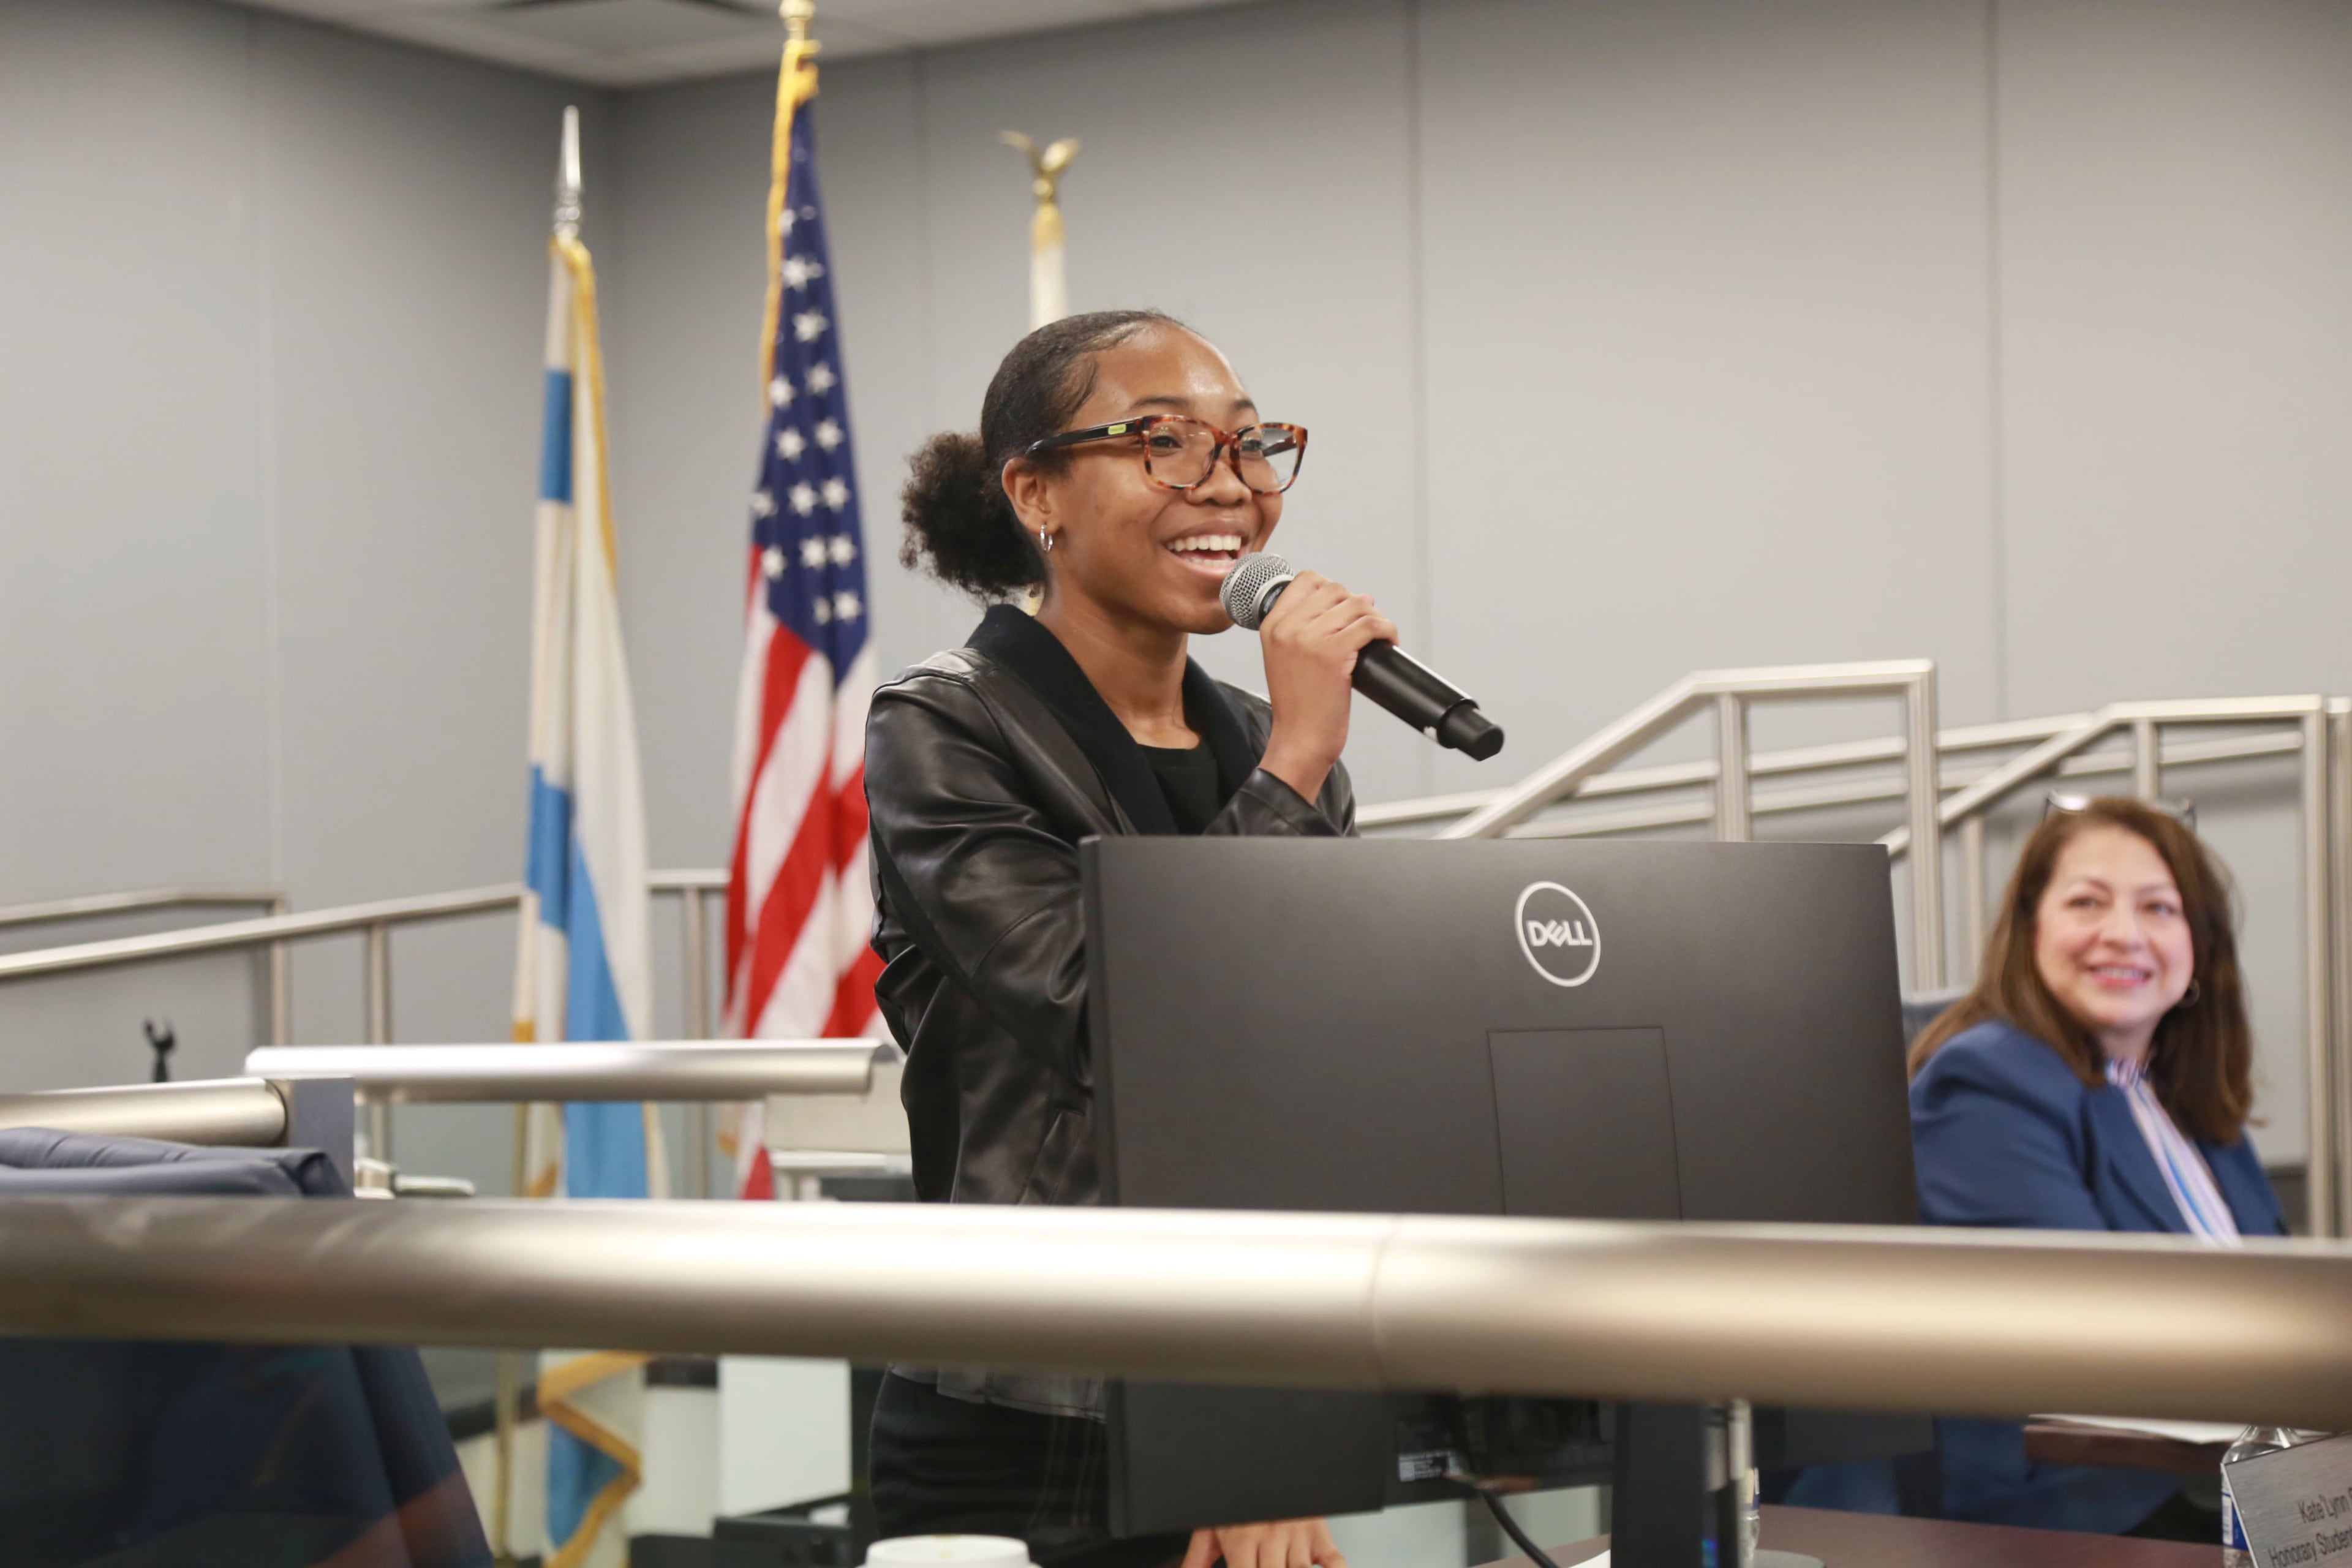 Kate’lynn Shaw, a 16-year-old girl, raises a microphone to her mouth and smiles at a school board meeting. Behind her are the Illinois, Chicago and American flags, stood up on poles. A woman to her right, sitting down, looks at her and smiles.